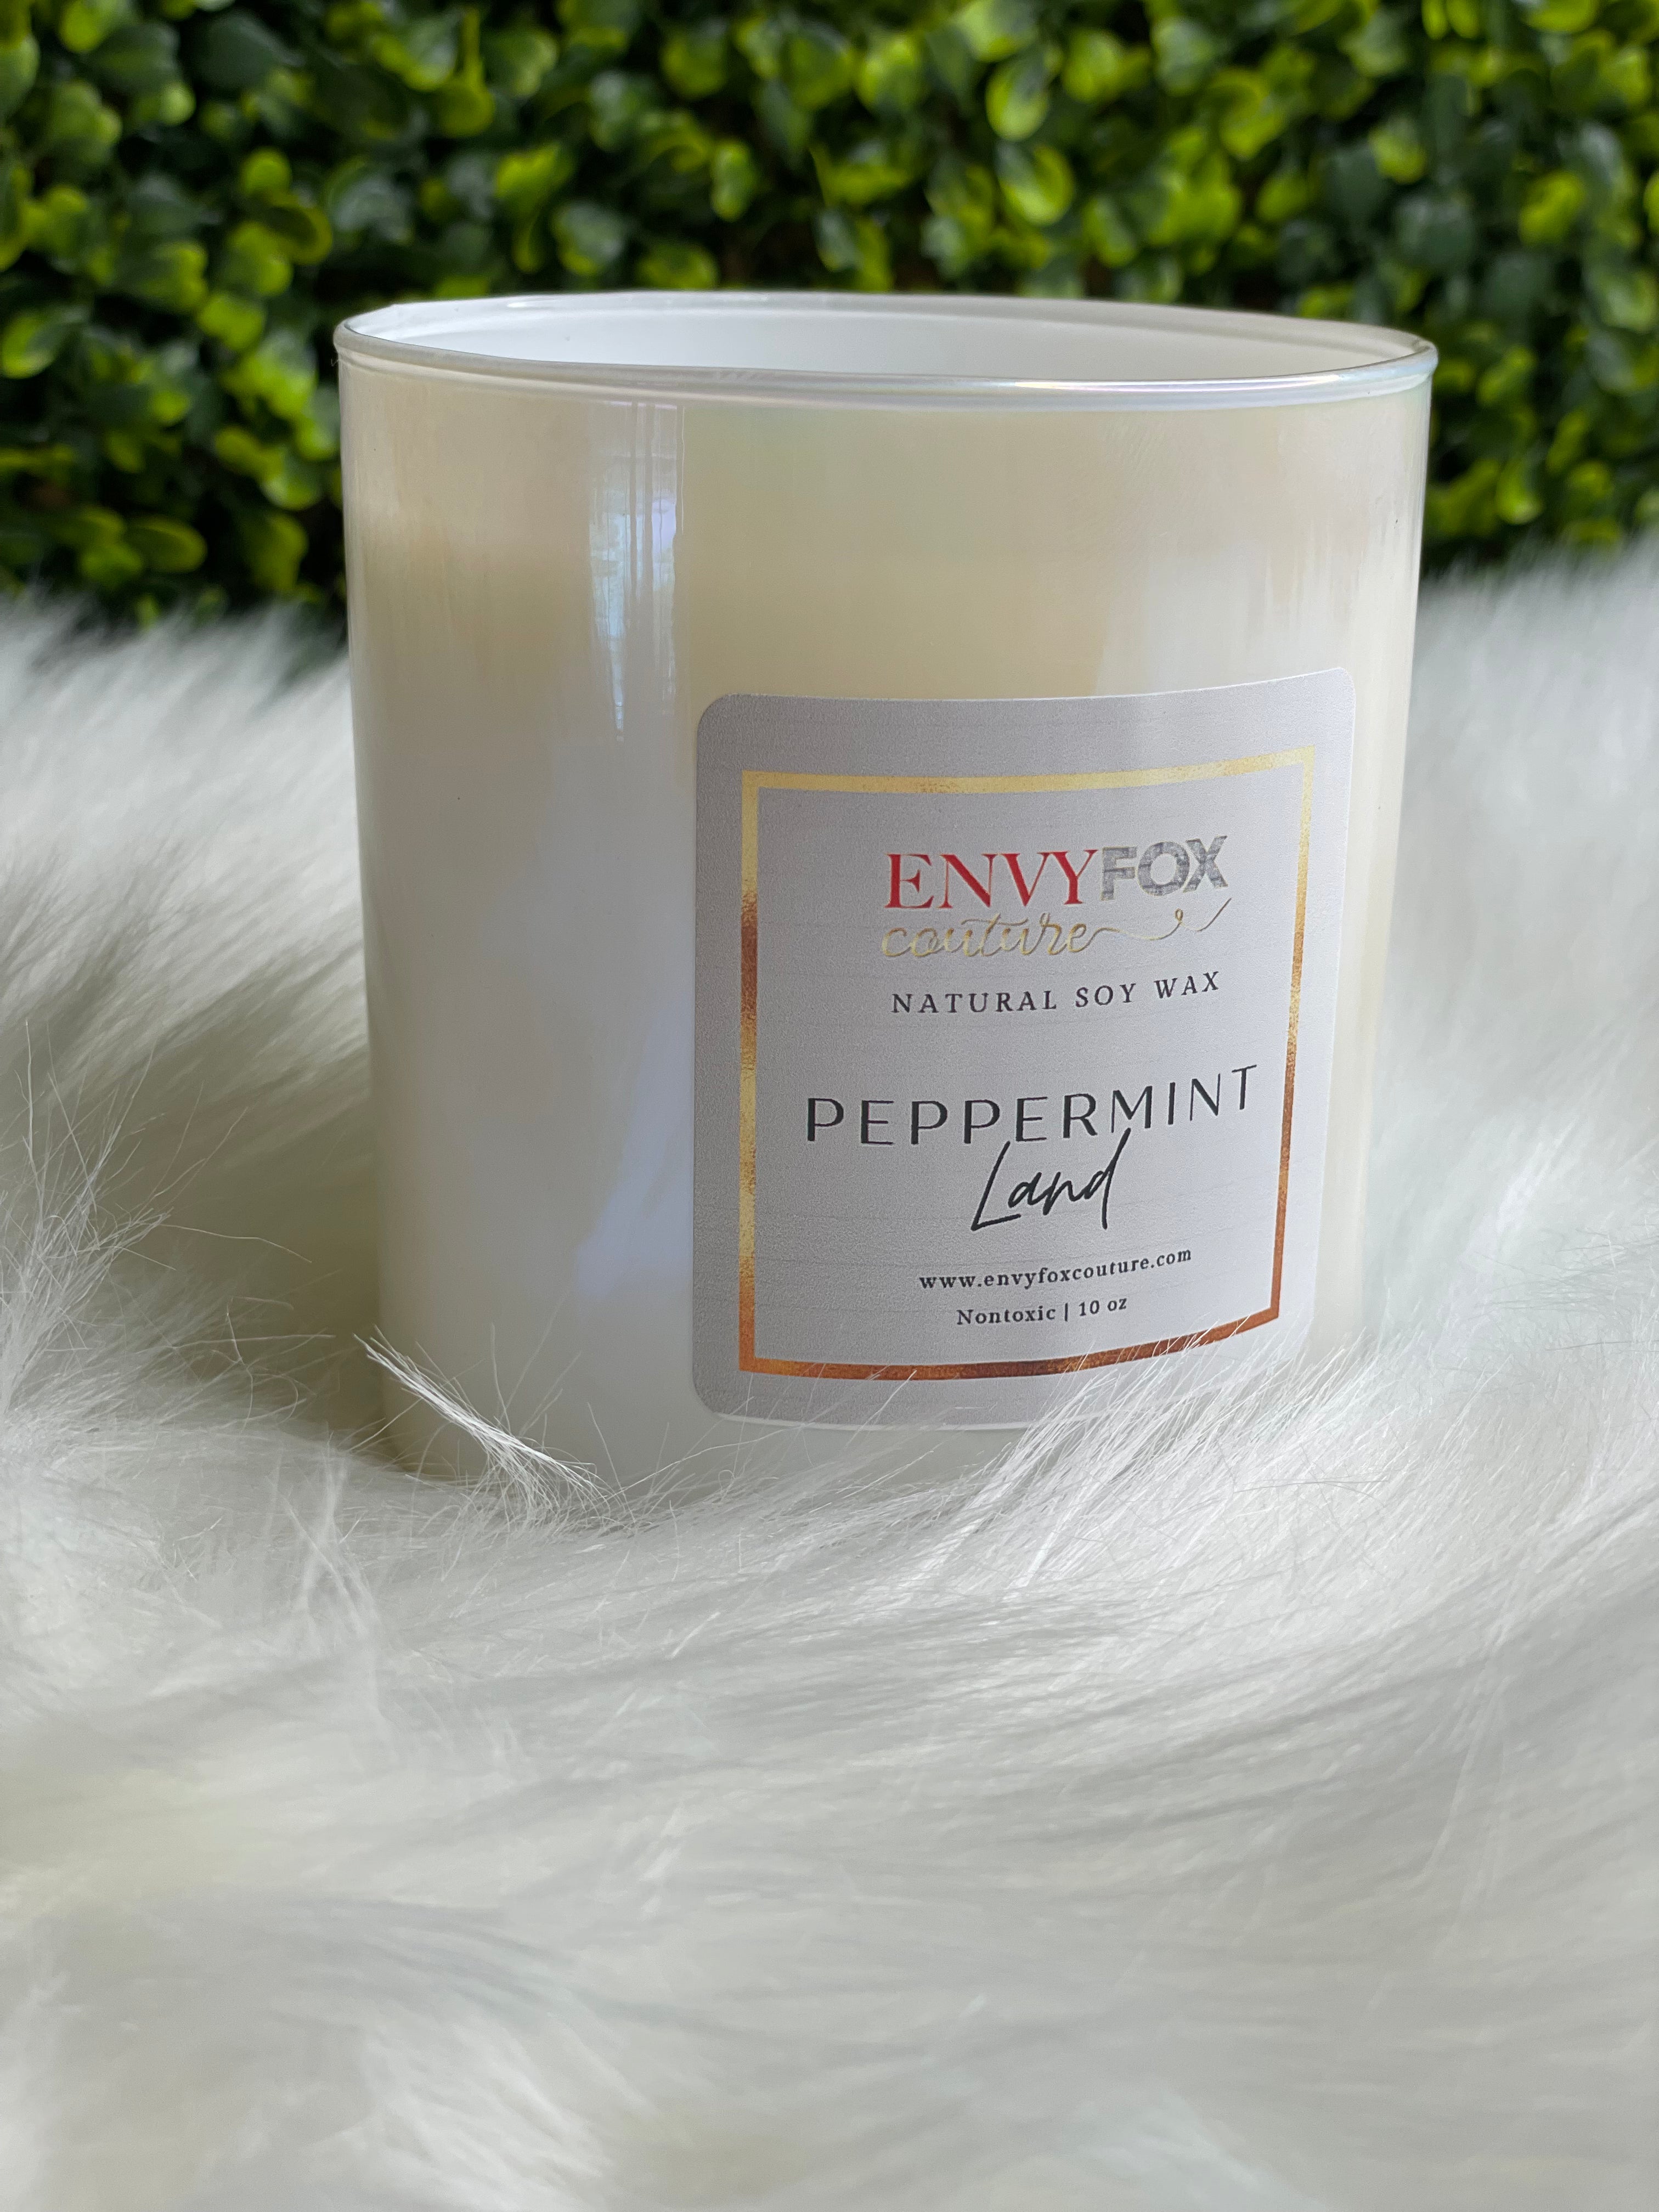 Peppermint Land 10 oz Natural Soy Wax Candle